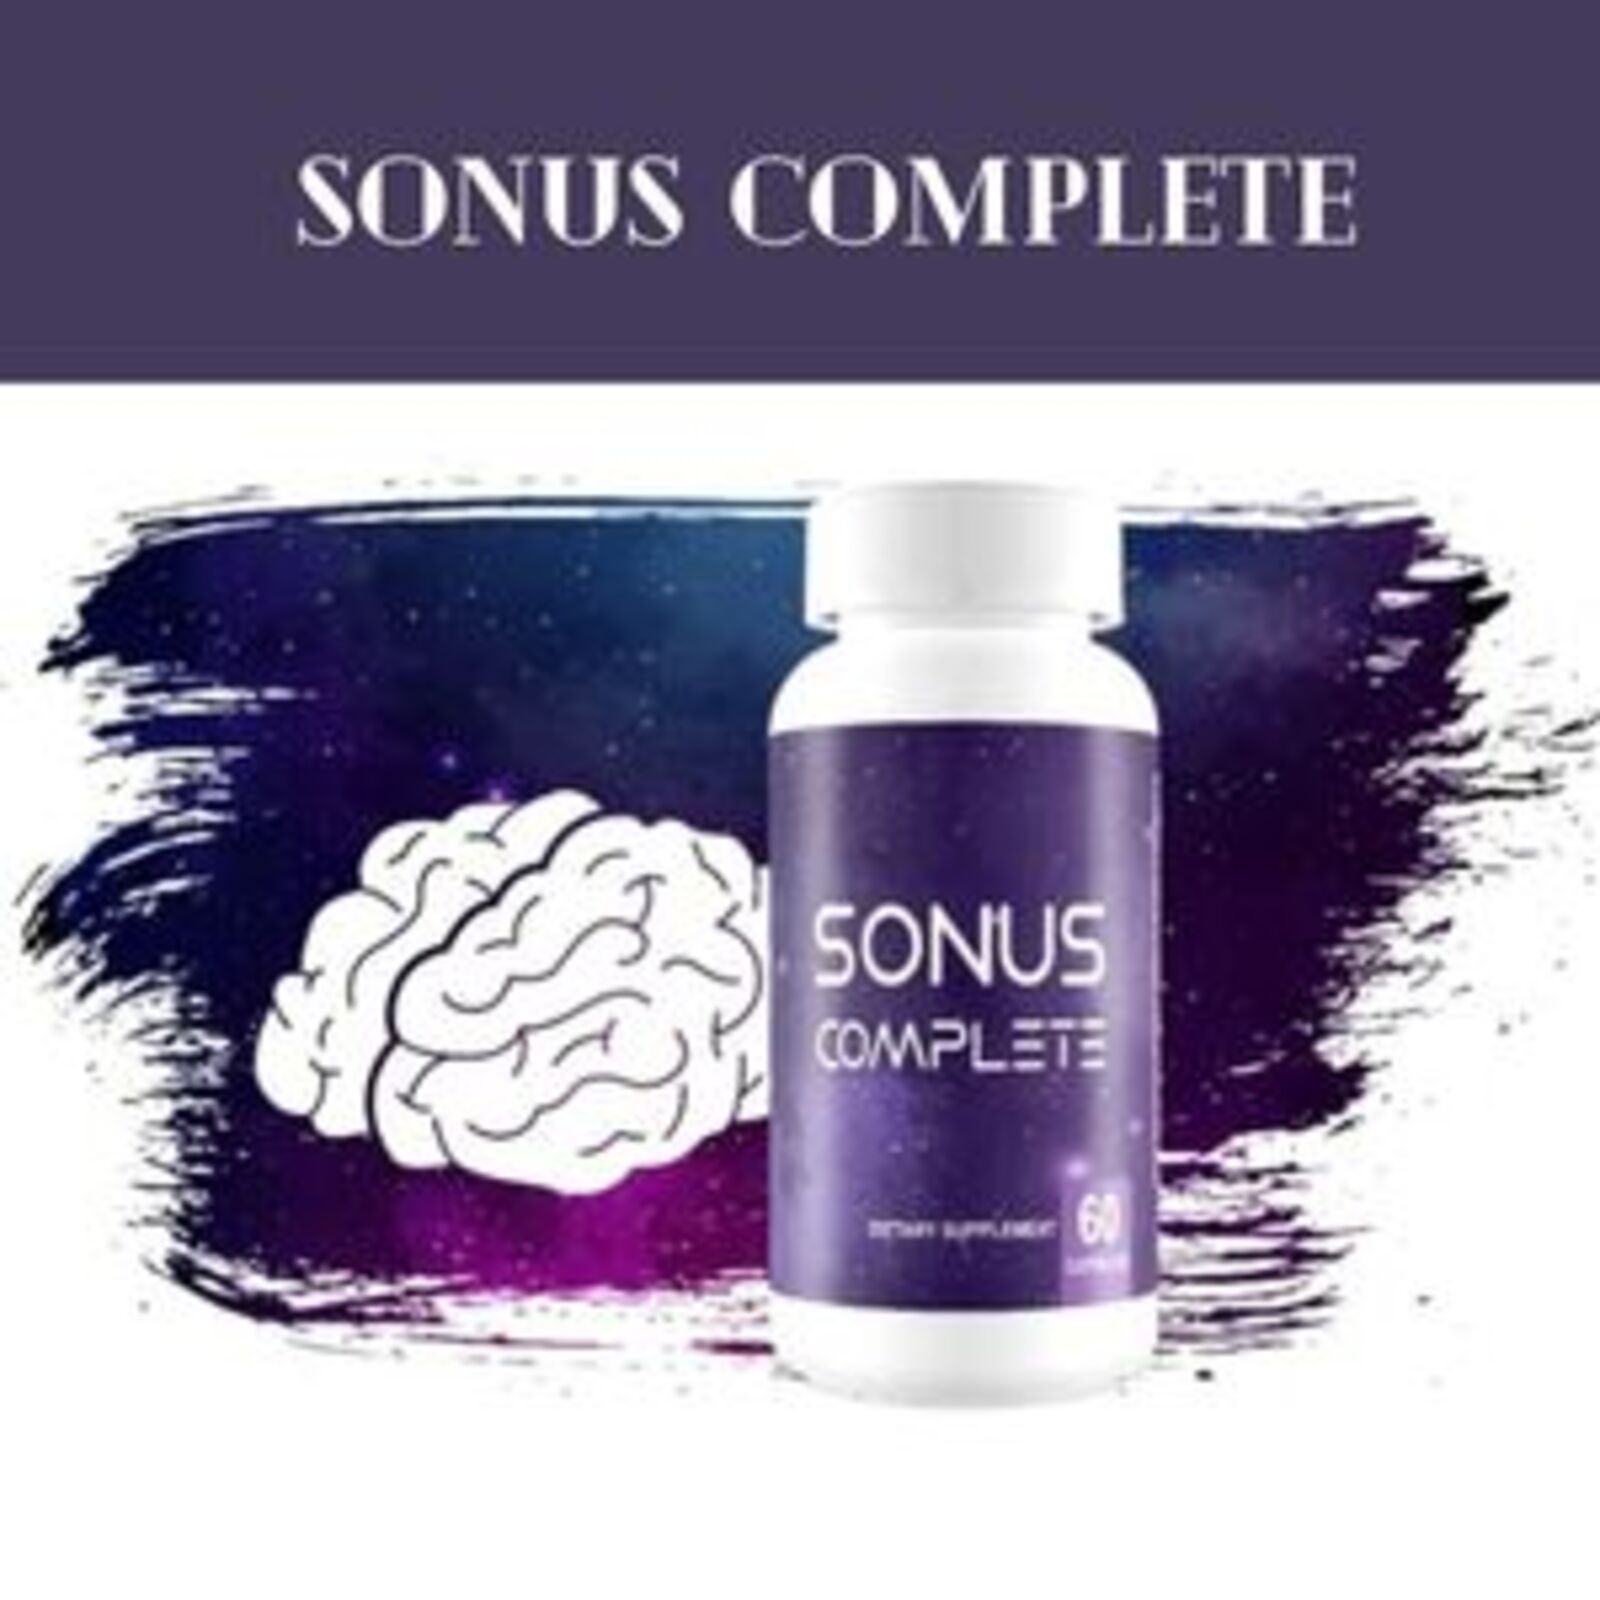 Does Sonus Complete Supplement Really work?